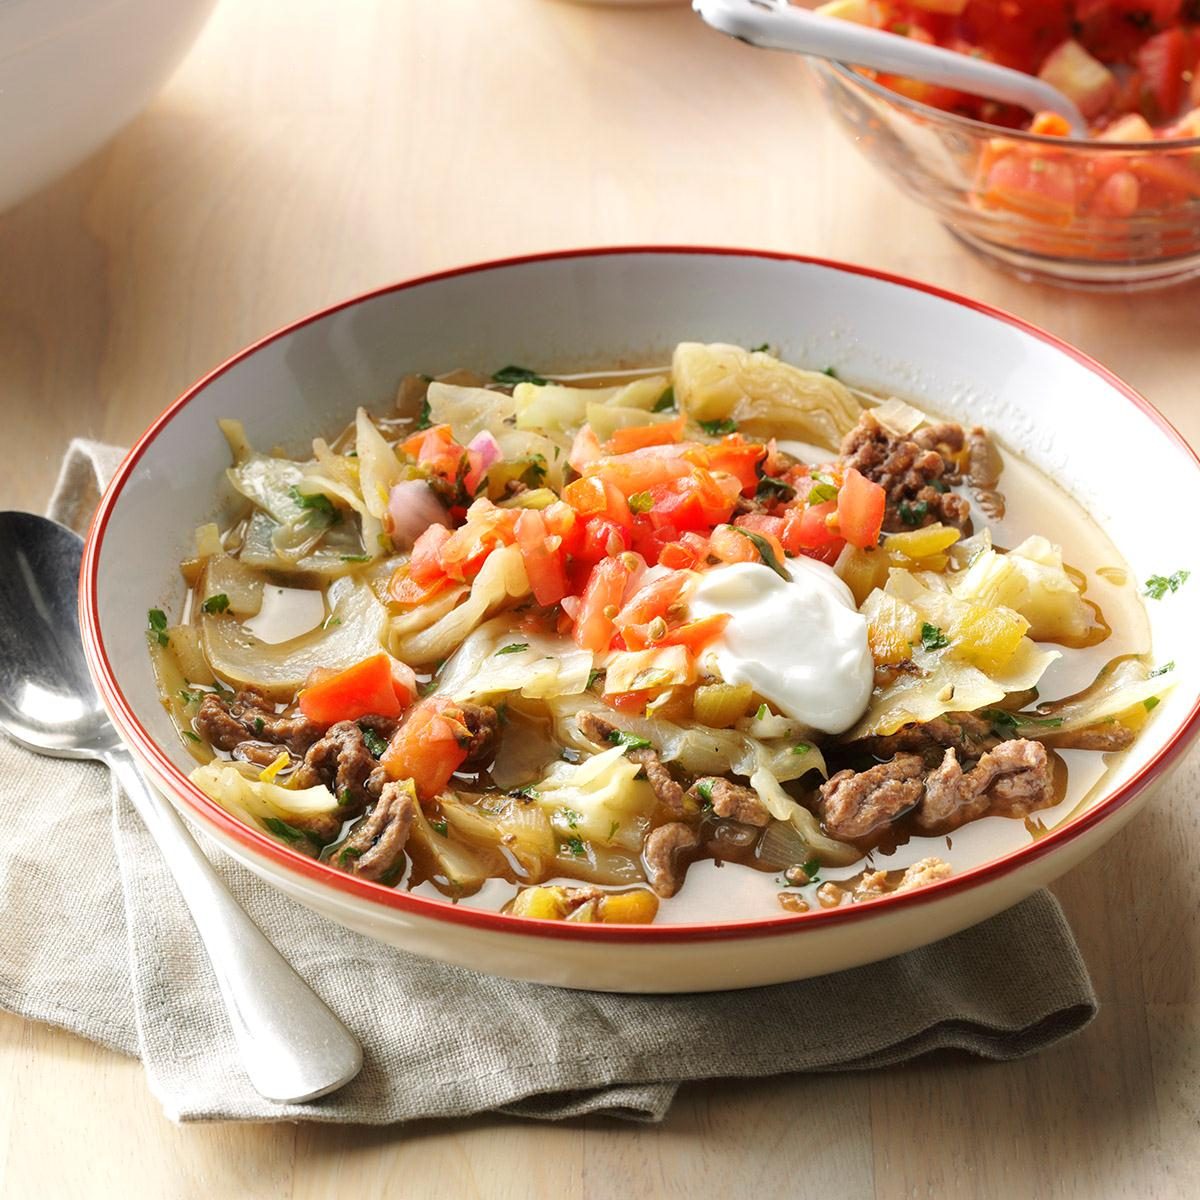 https://www.tasteofhome.com/wp-content/uploads/2018/01/Mexican-Cabbage-Roll-Soup_EXPS_SDON16_123236_D06_09_1b-1.jpg?fit=700%2C1024